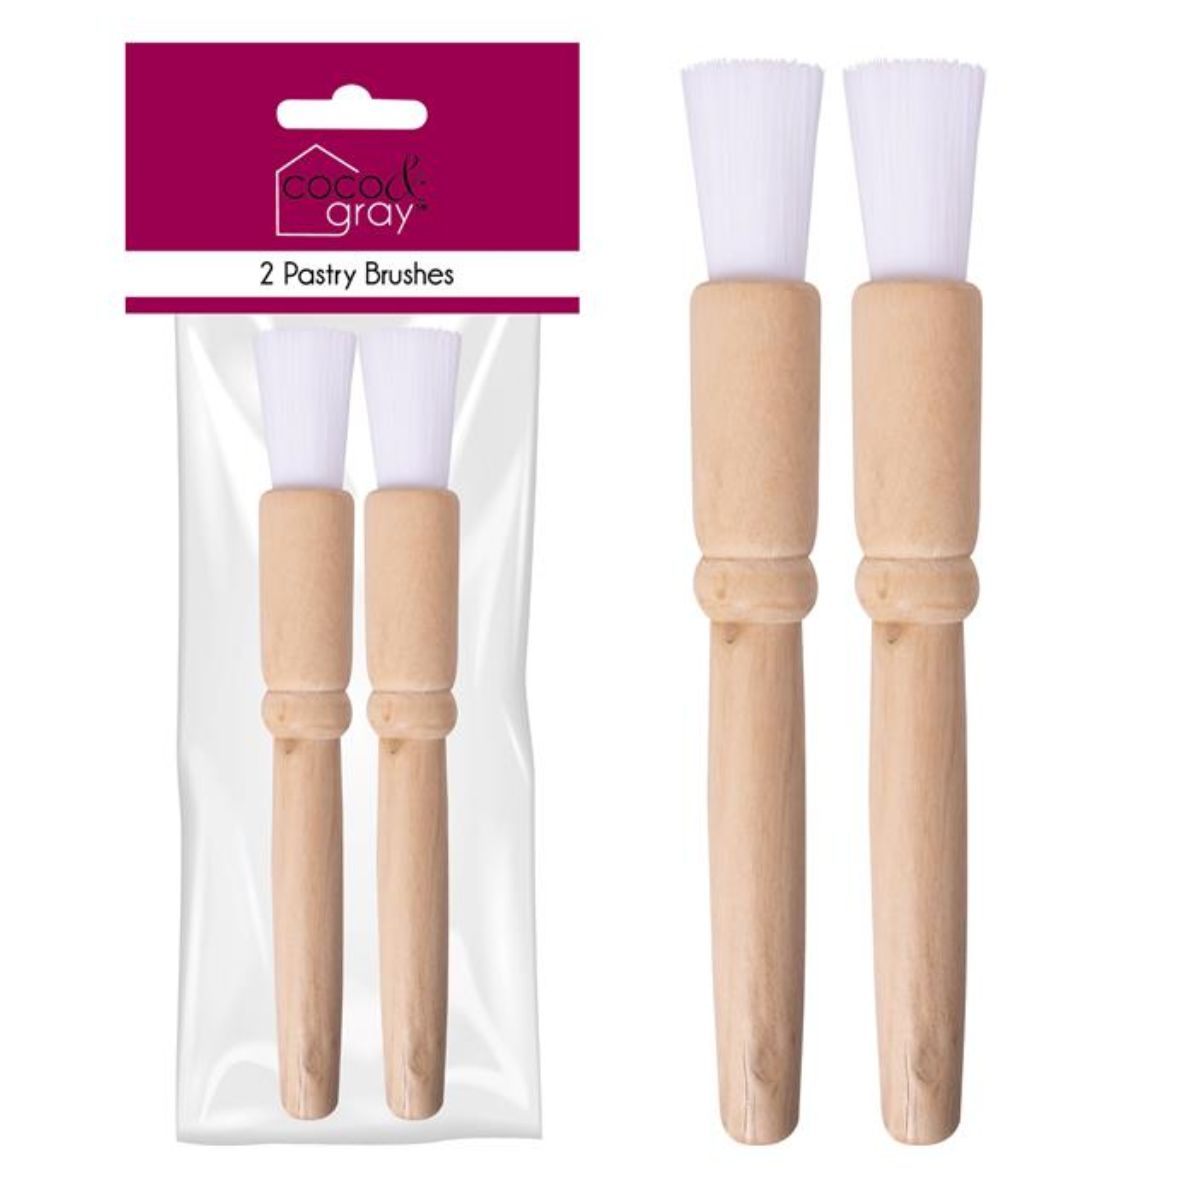 Pack of two Coco & Gray wooden pastry brushes with white bristles, displayed in packaging.